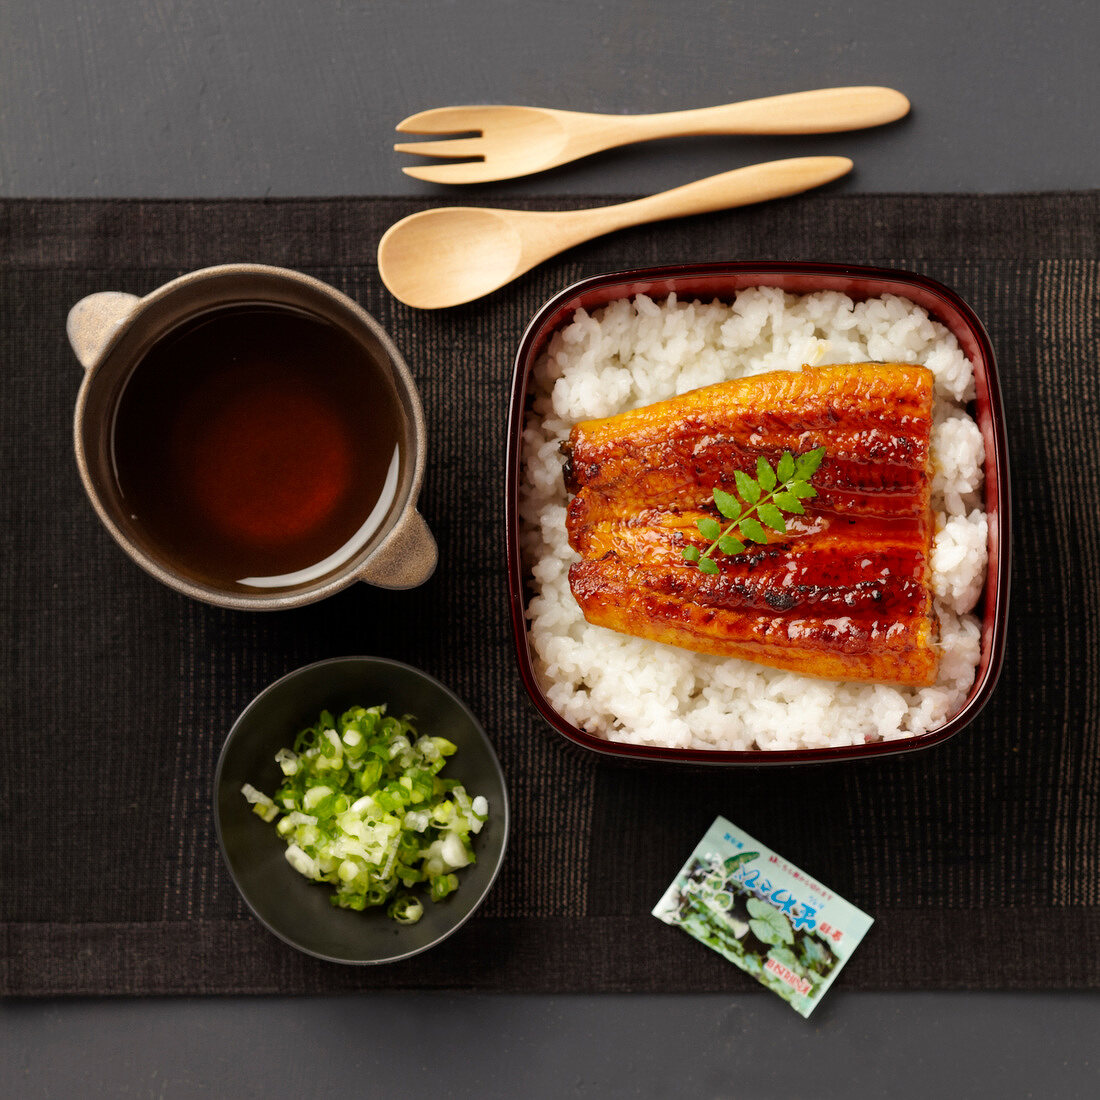 Steamed and glazed eel and sticky rice bento